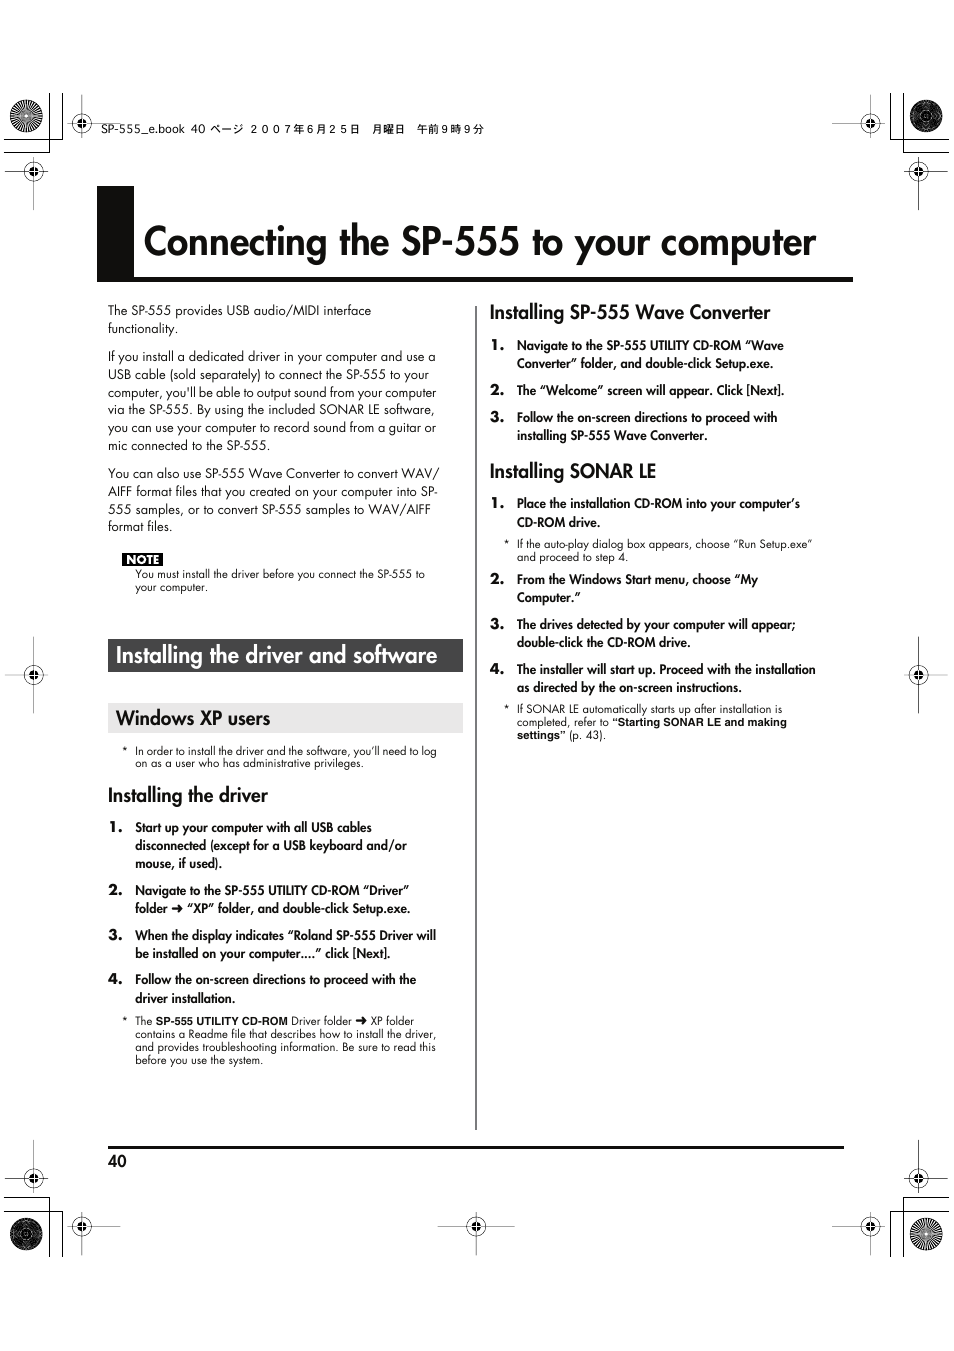 Connecting the sp-555 to your computer, Installing the driver and